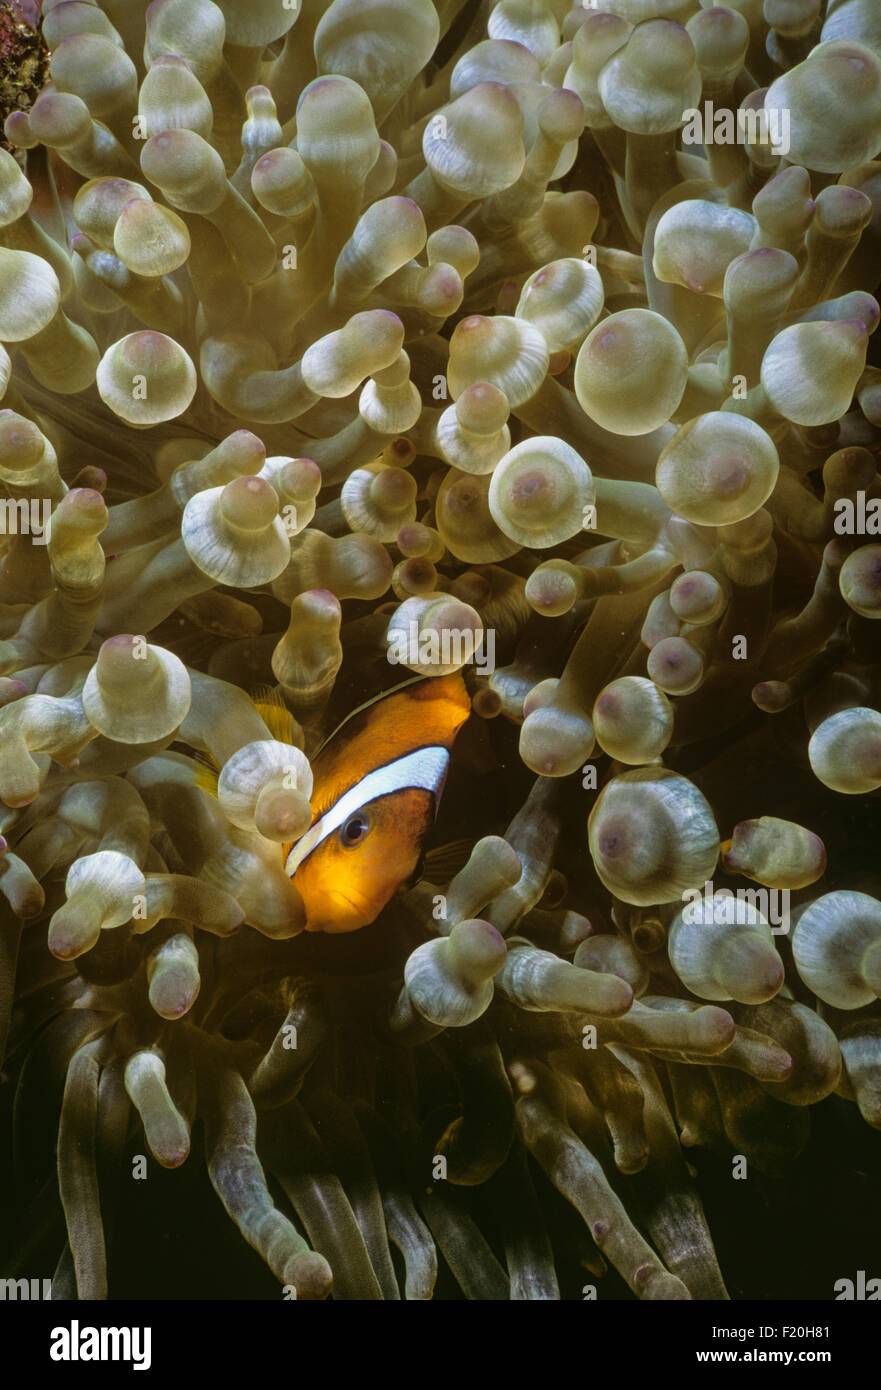 Two-bar Clownfish (Amphiprion bicinctus) hides in Magnifiscent Sea Anemone ( Heteractis magnifica) (an example of a symbiotic re Stock Photo